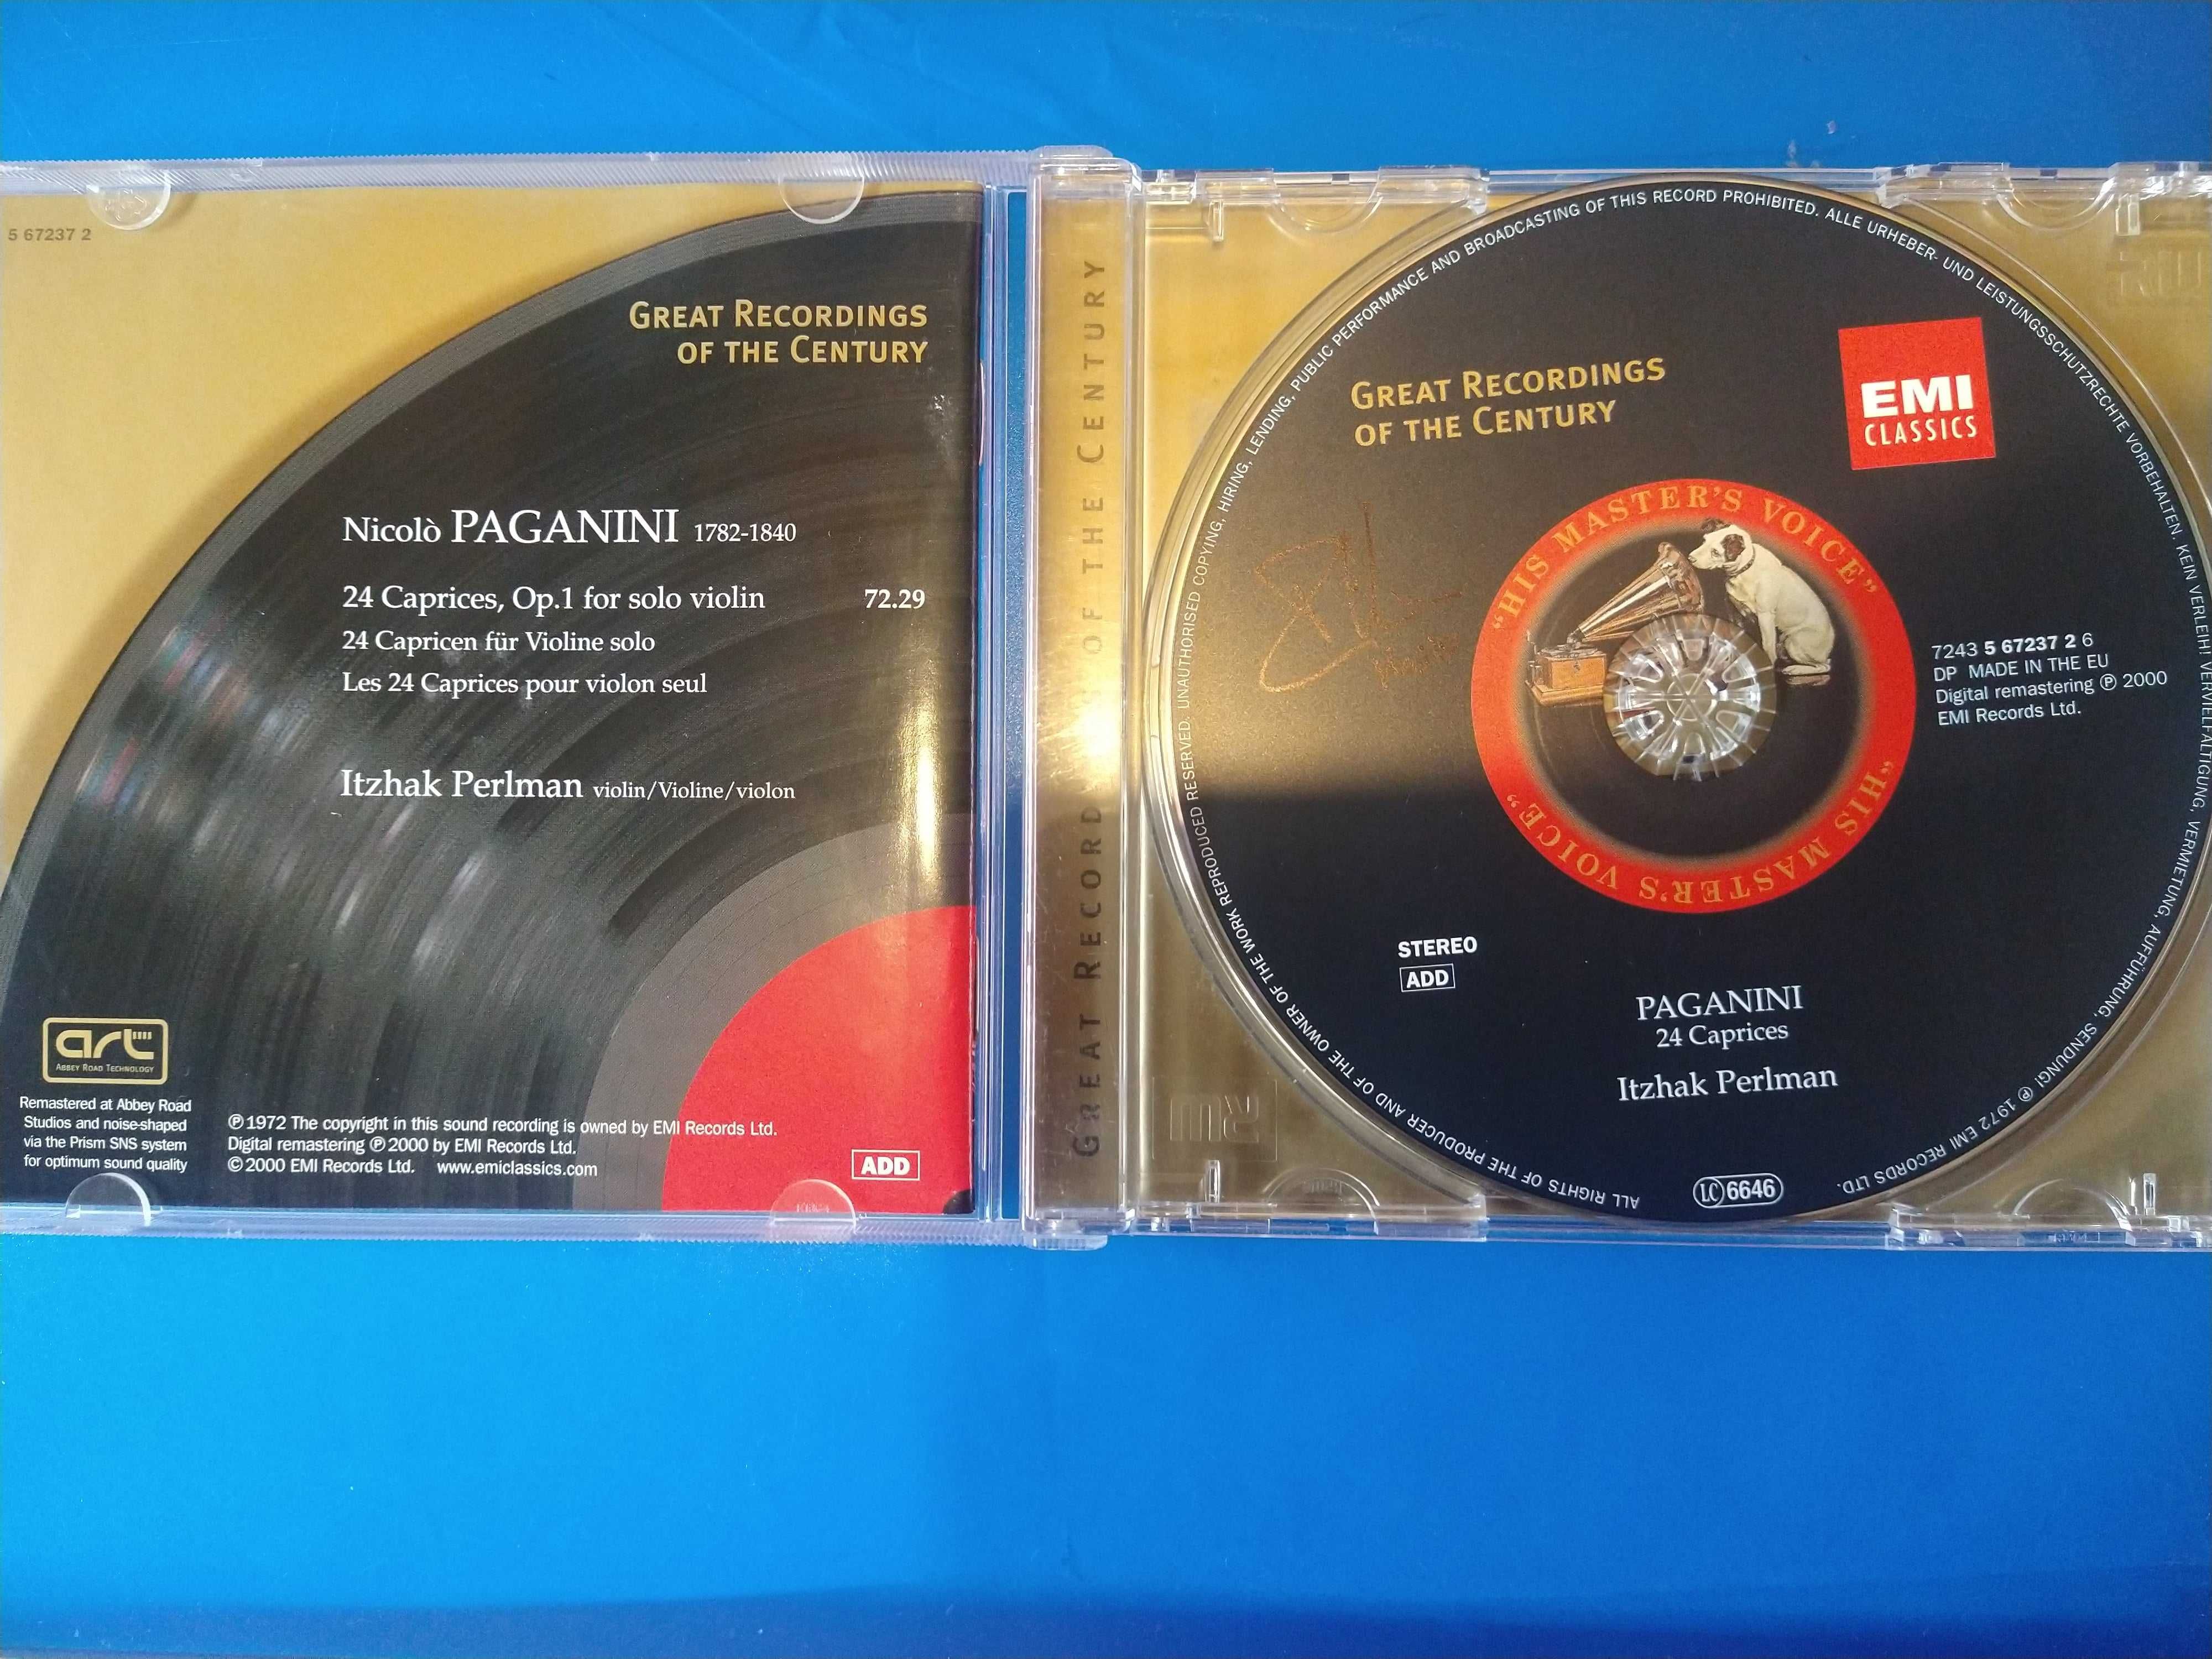 CD Paganini, 24 Caprices, Itzhak Perlman - EMI Great Records of the C.